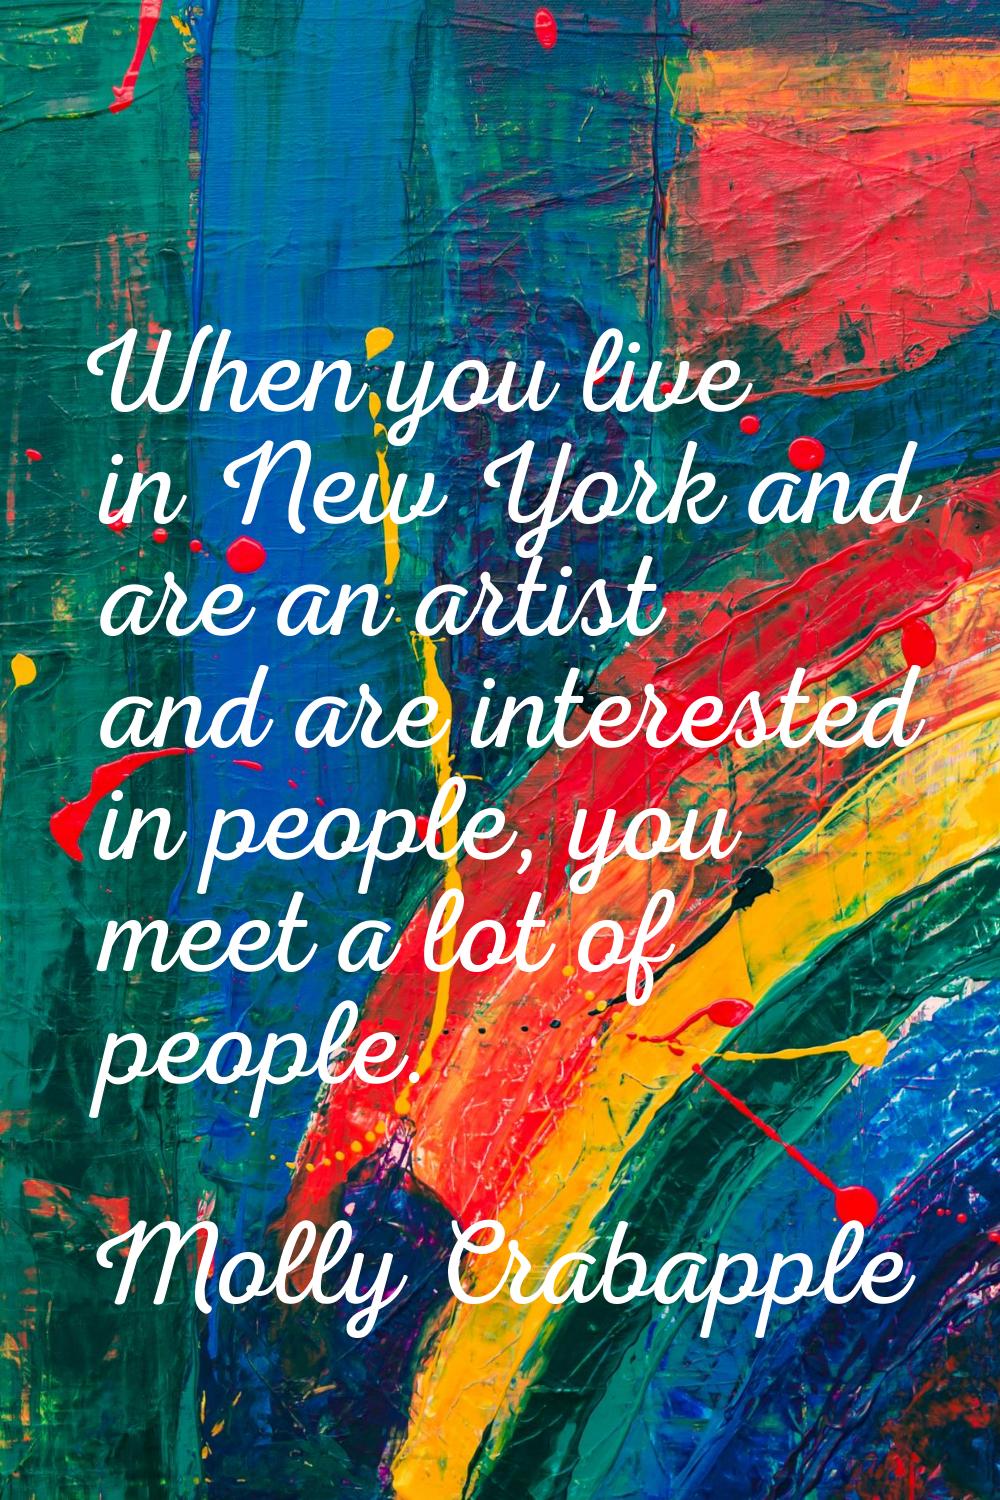 When you live in New York and are an artist and are interested in people, you meet a lot of people.